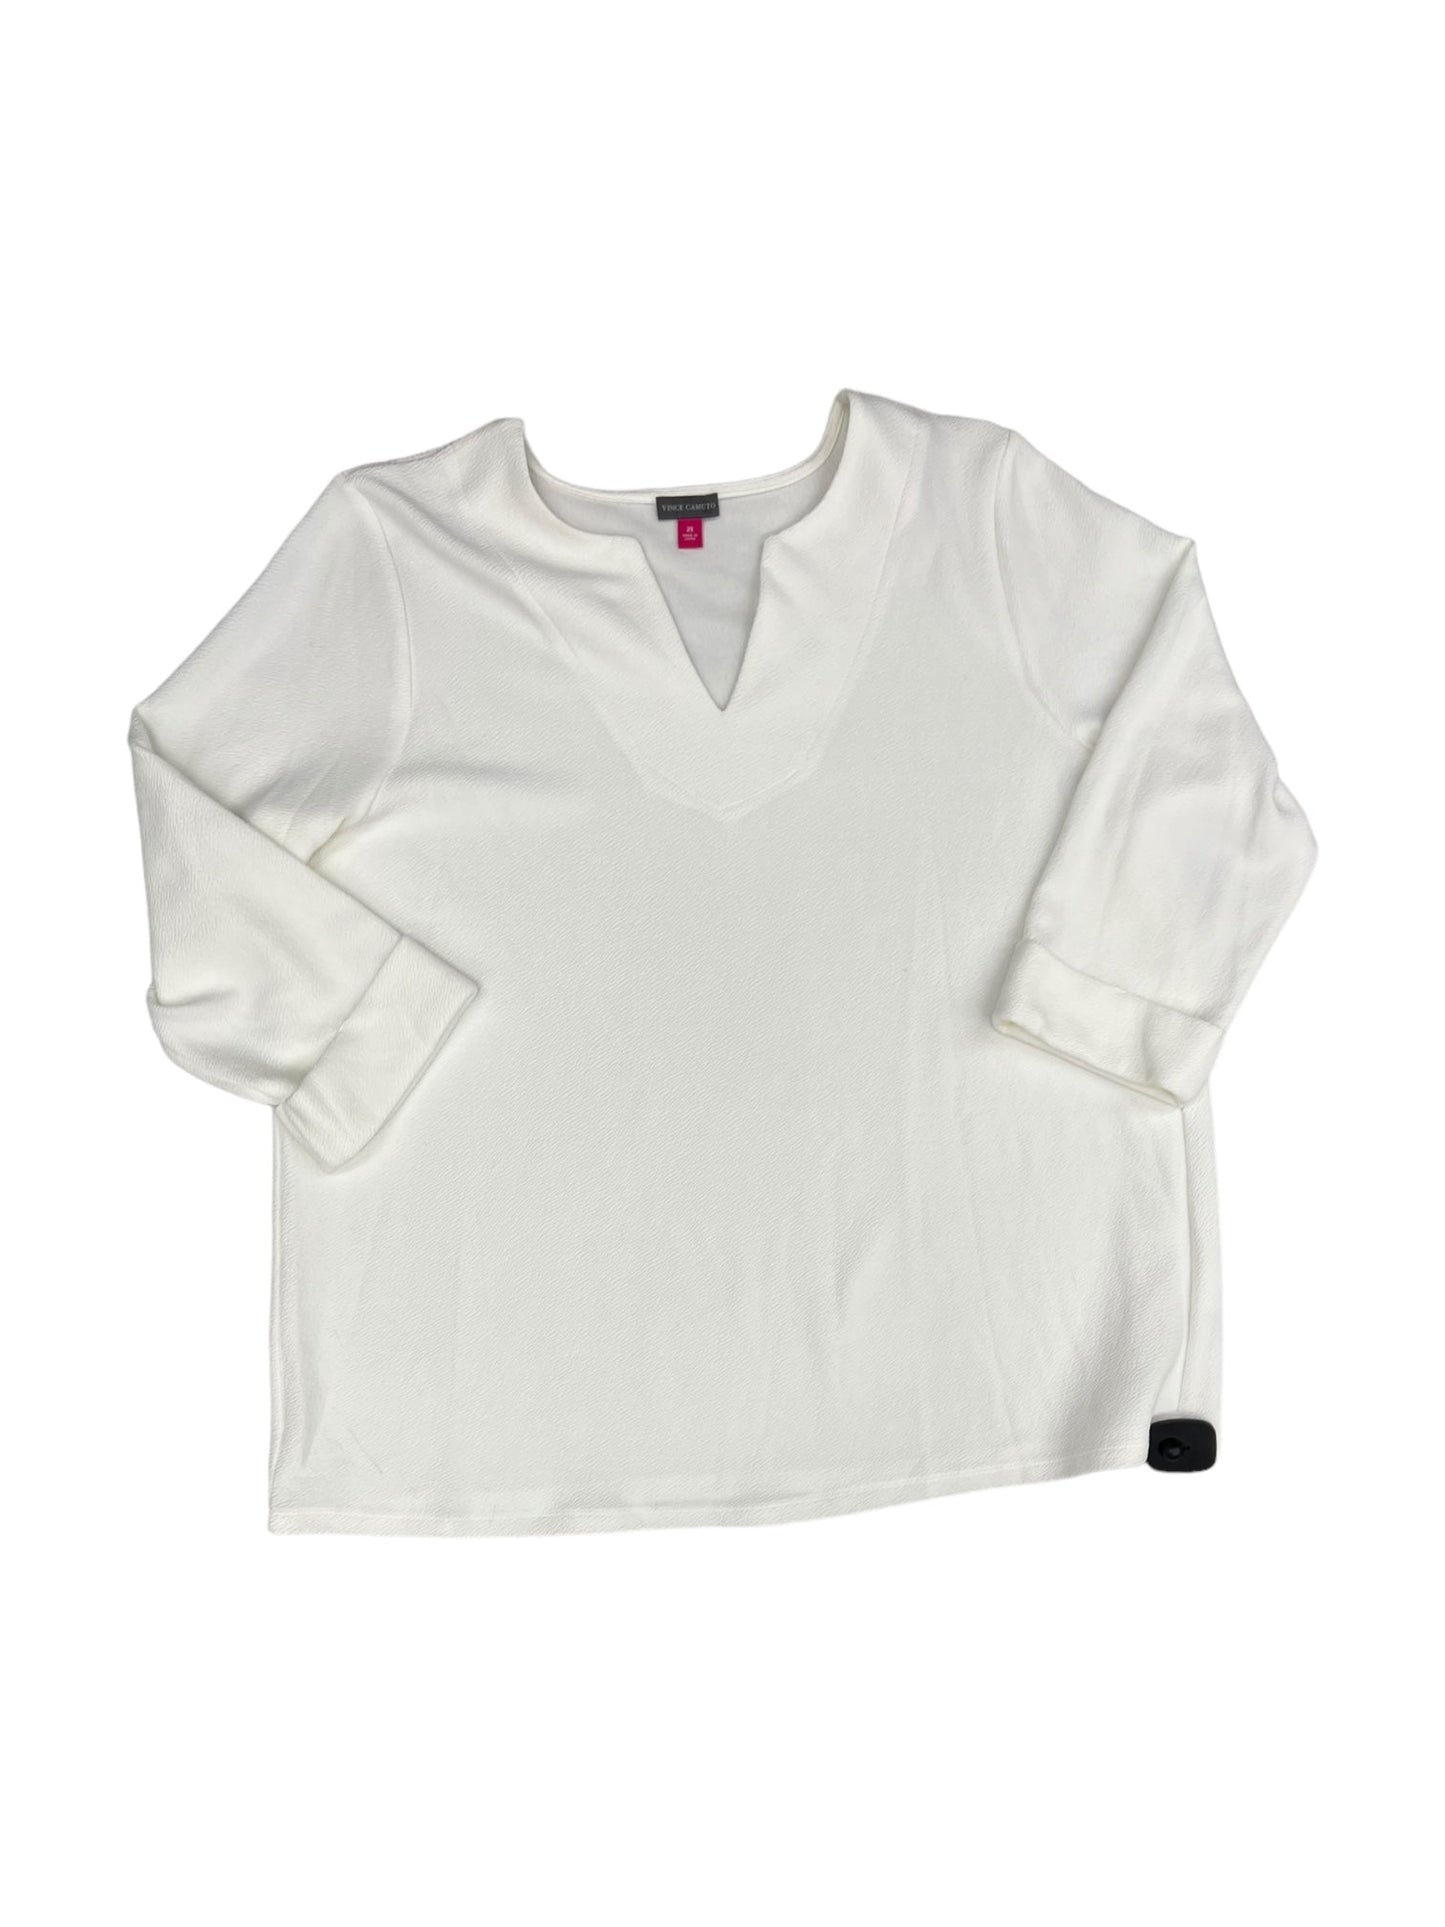 White Top Long Sleeve Vince Camuto, Size 2x